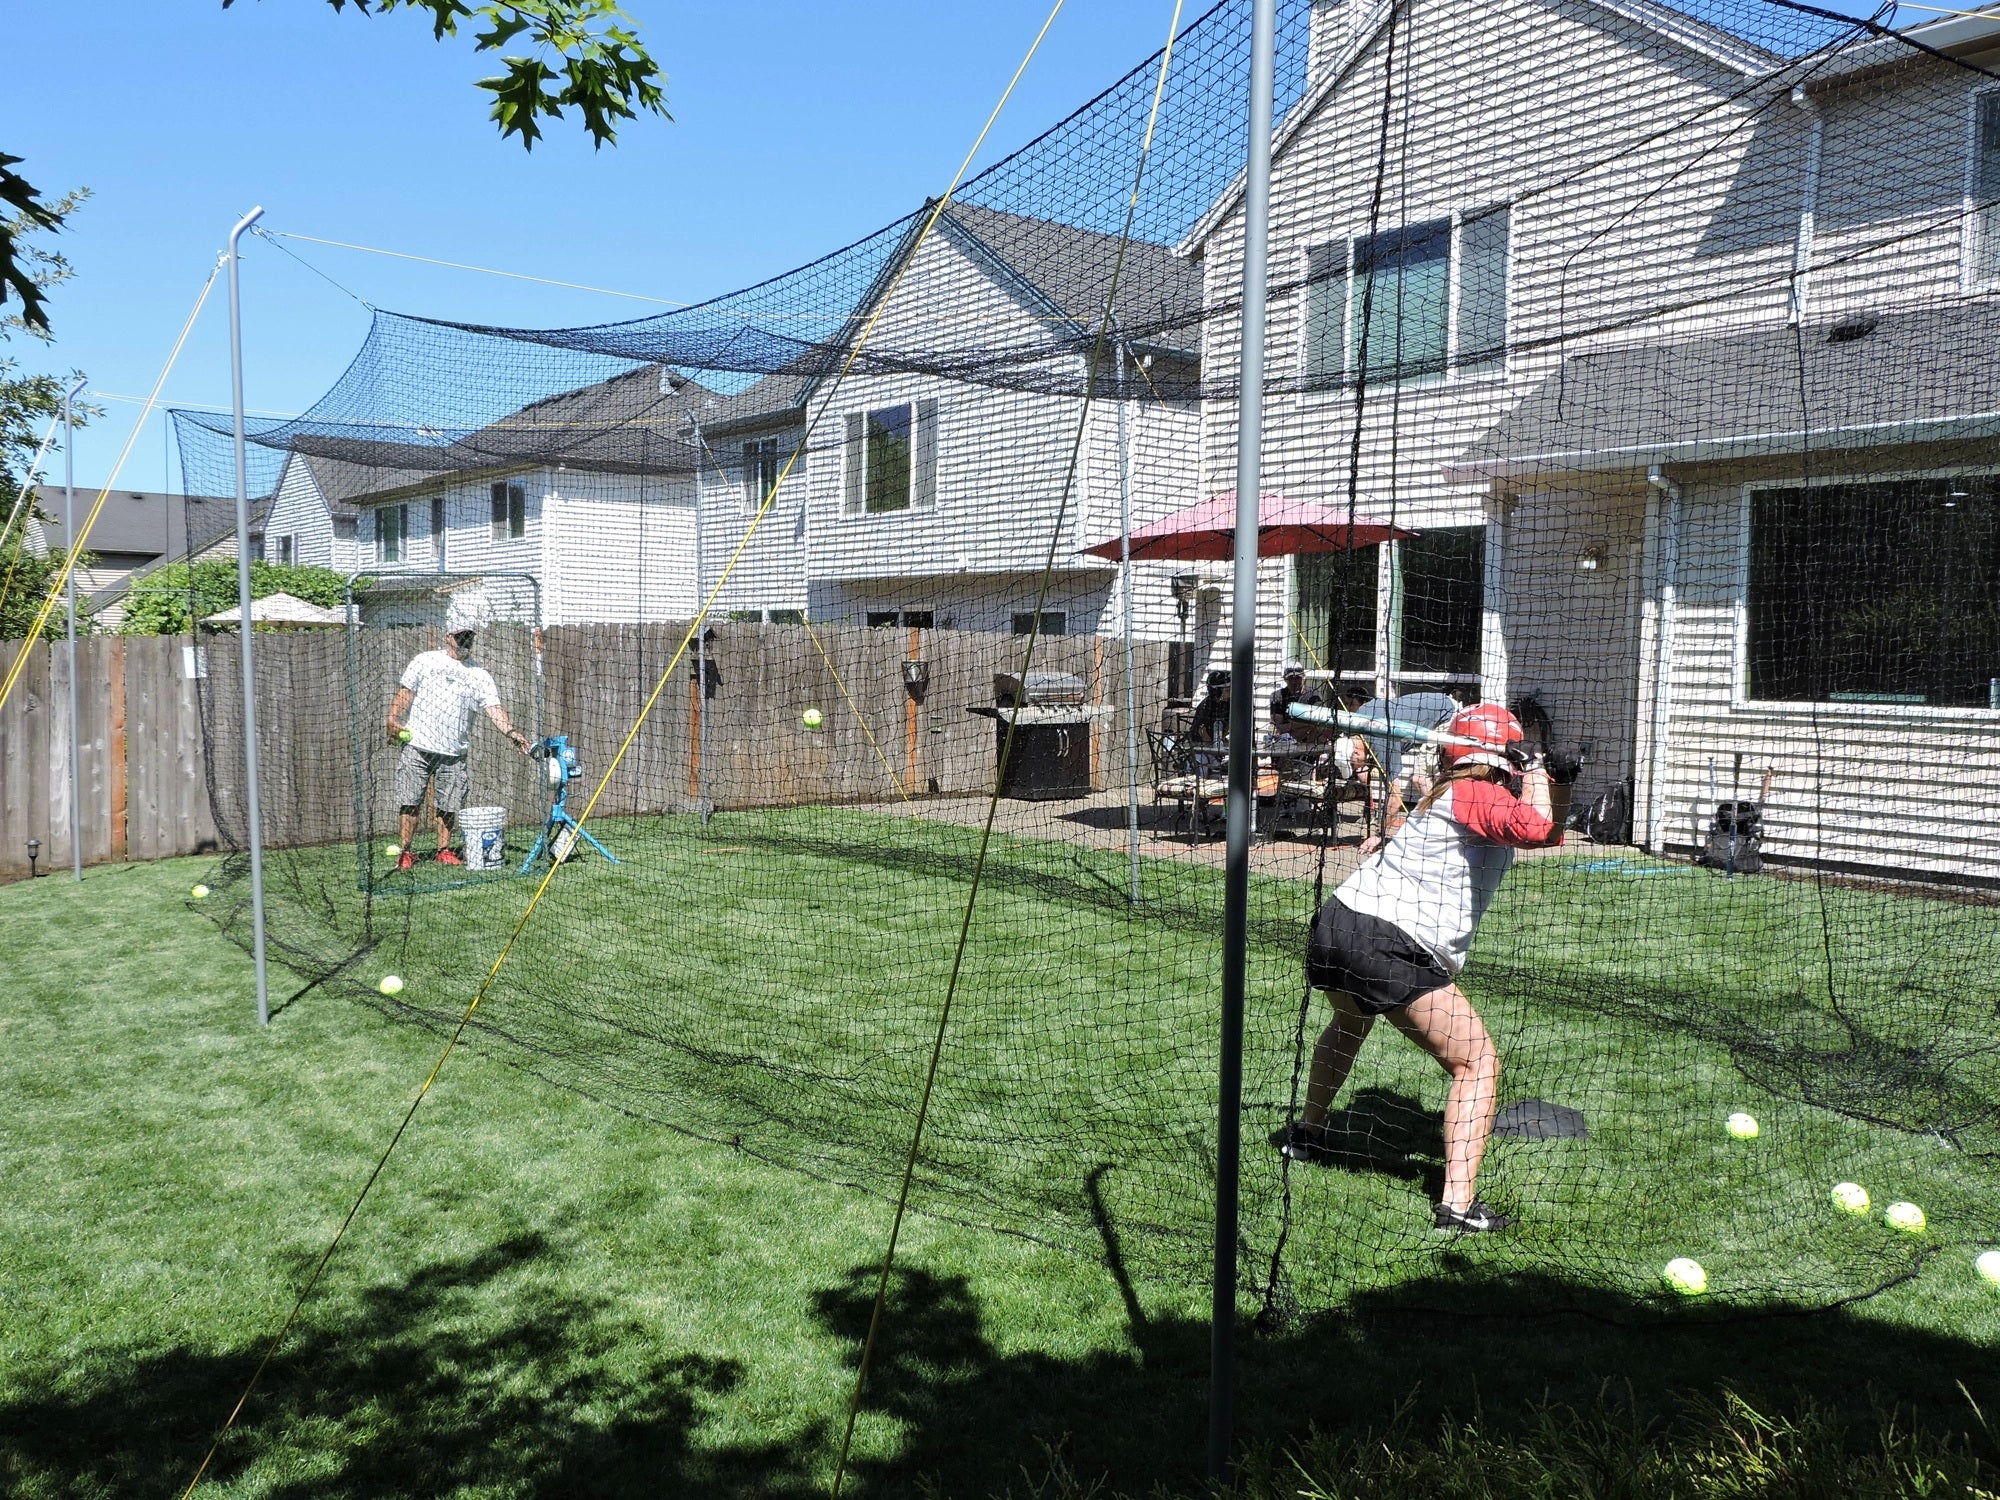 Jugs Hit at Home Complete Backyard Batting Cage with Pitching Machine and Batter in Practice